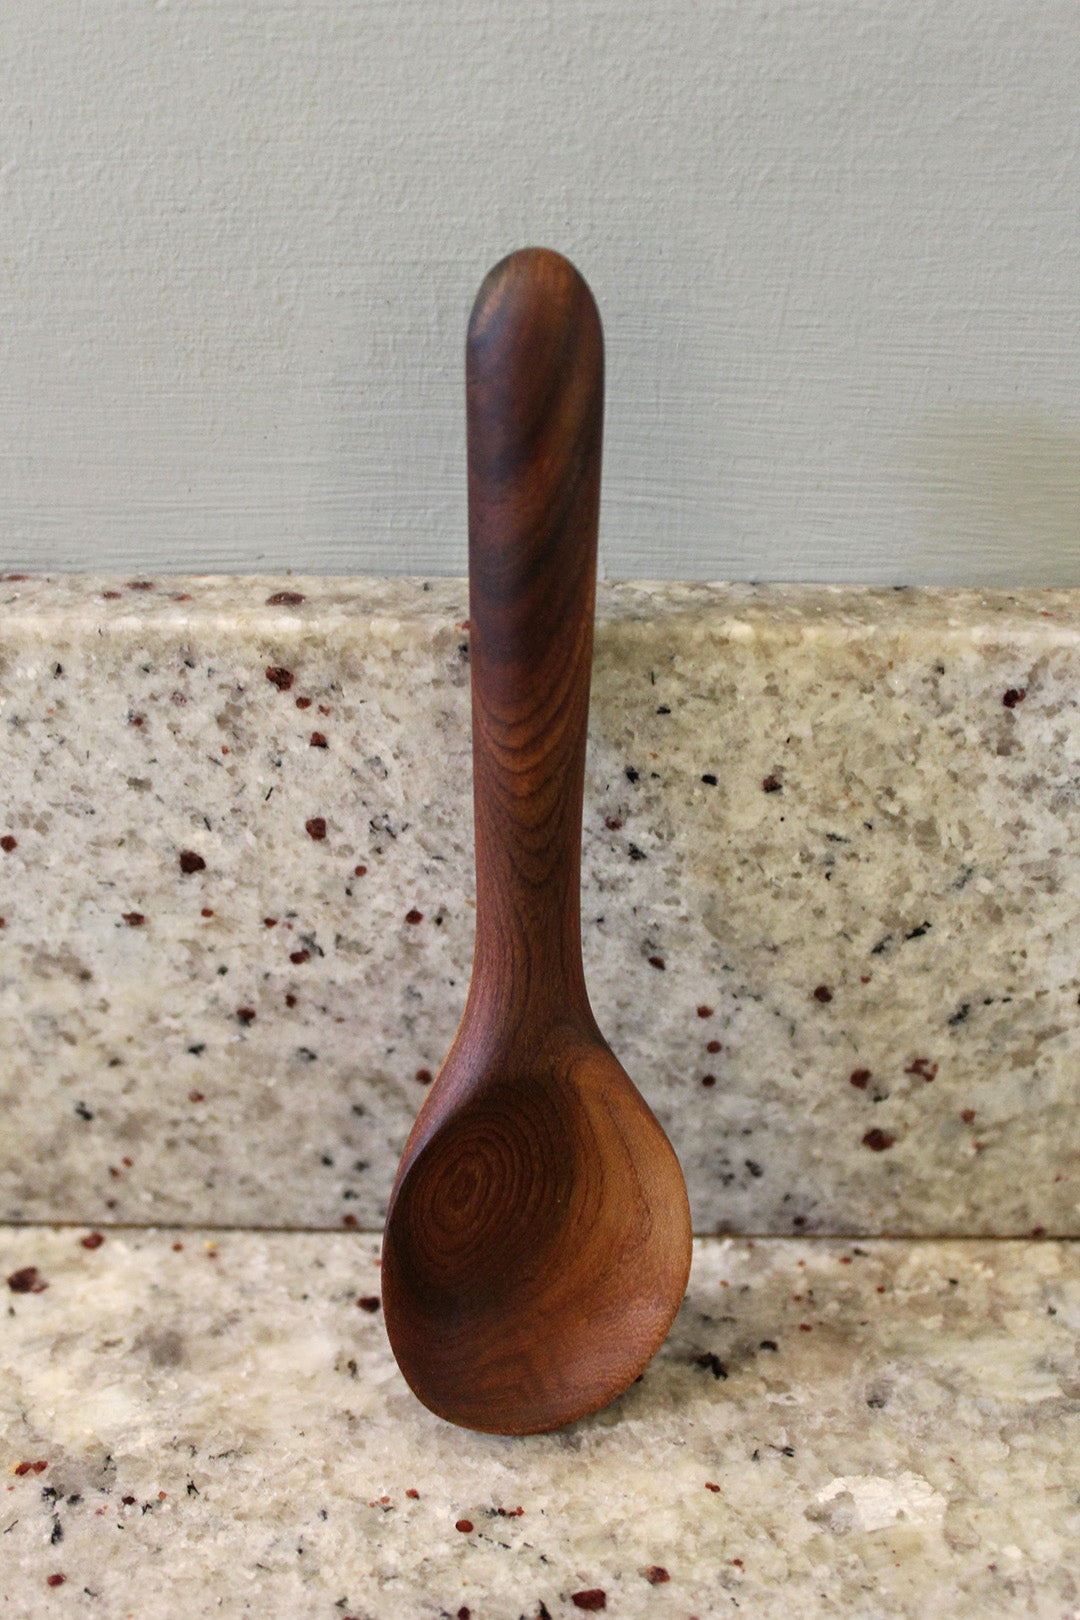  Spice spoon hand carved from Elm, in Fife. Scottish Textiles Showcase